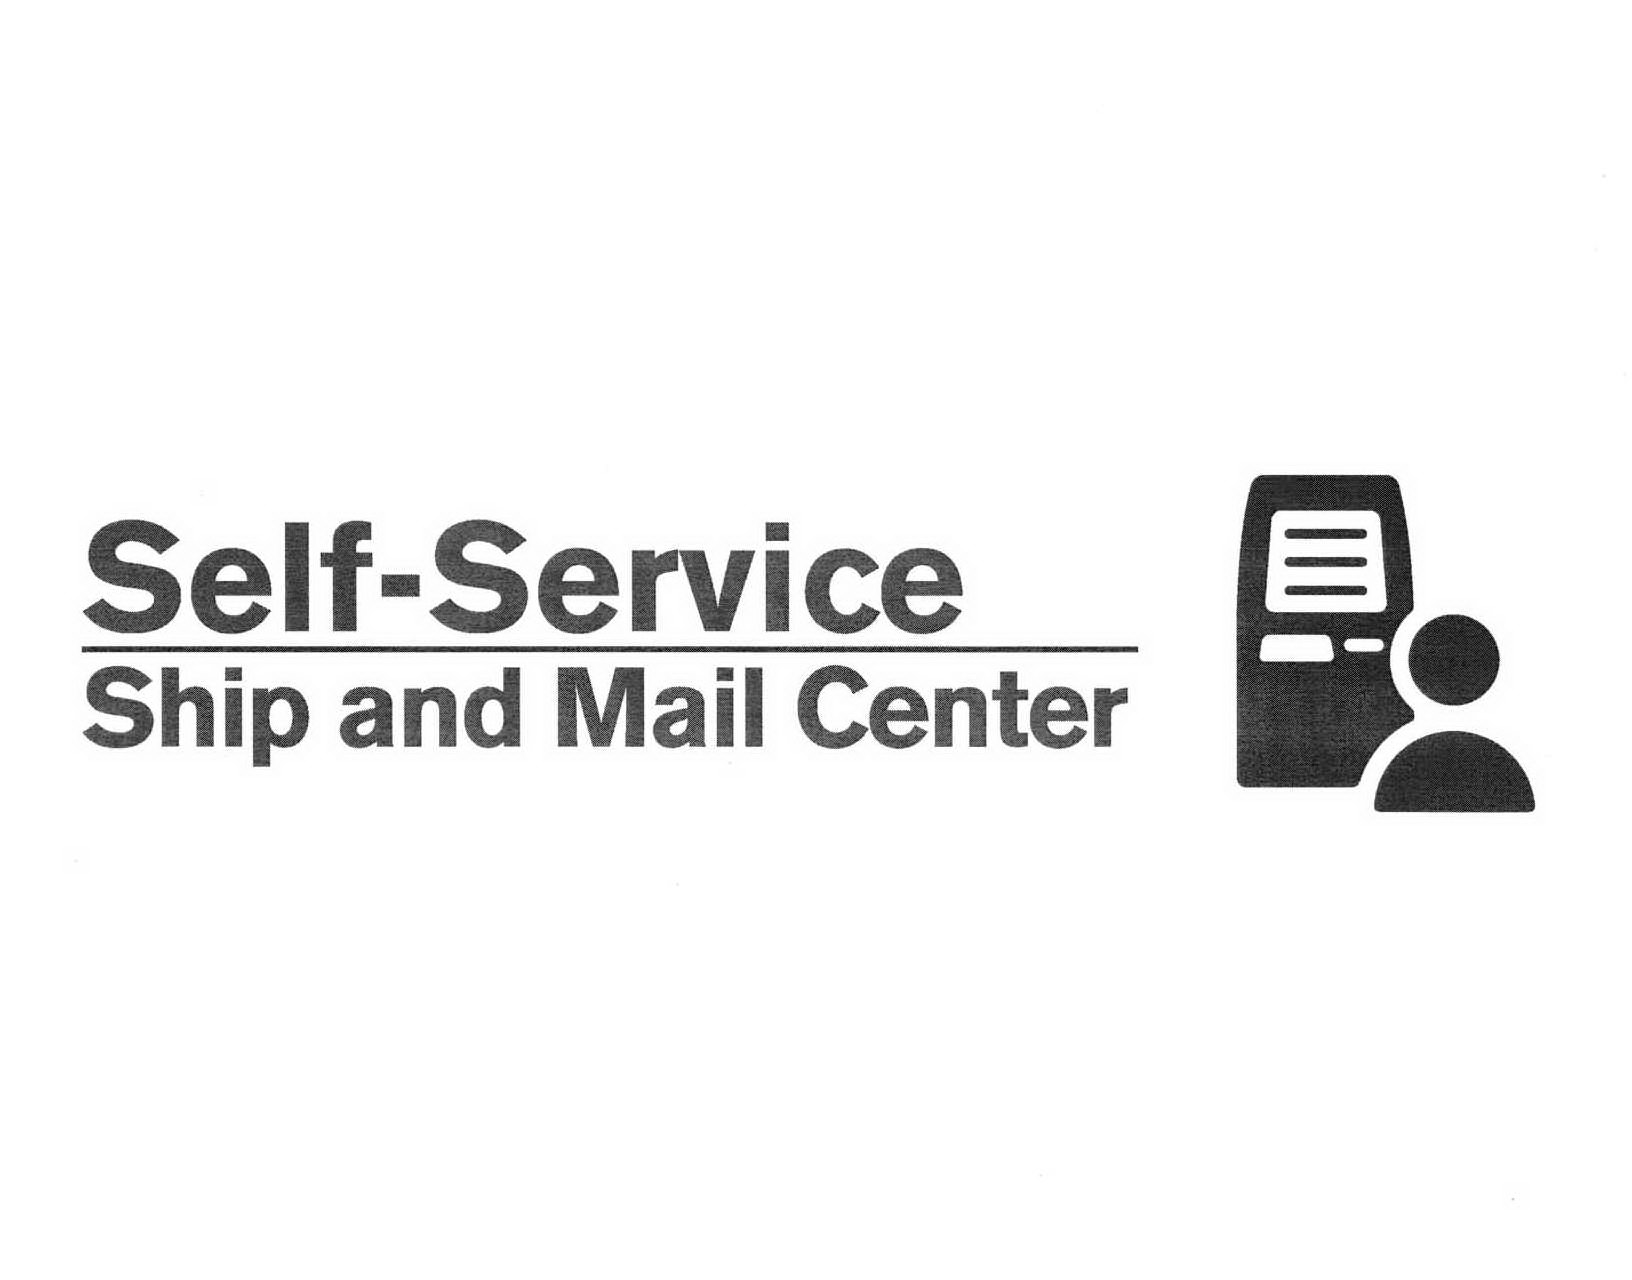  SELF-SERVICE SHIP AND MAIL CENTER